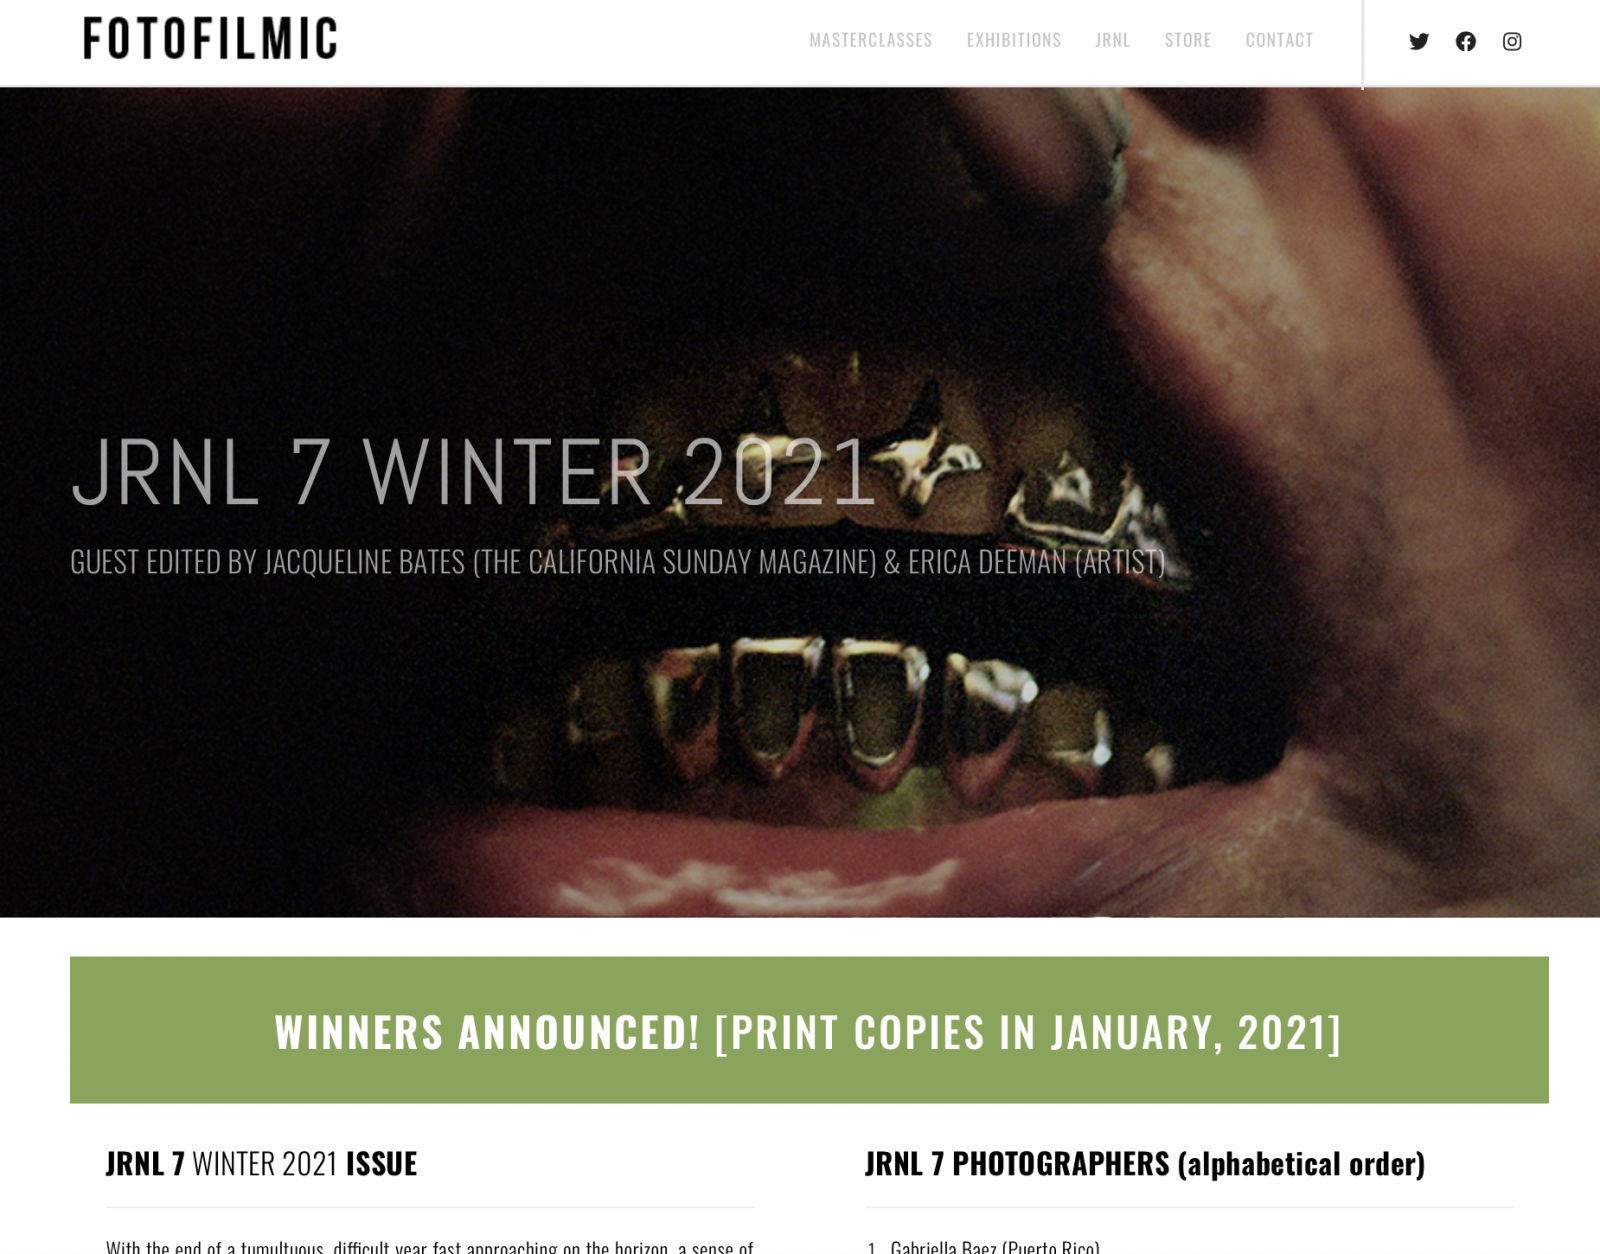 Selected for FotoFilmic Winter 2020 JRNL 7 publication!